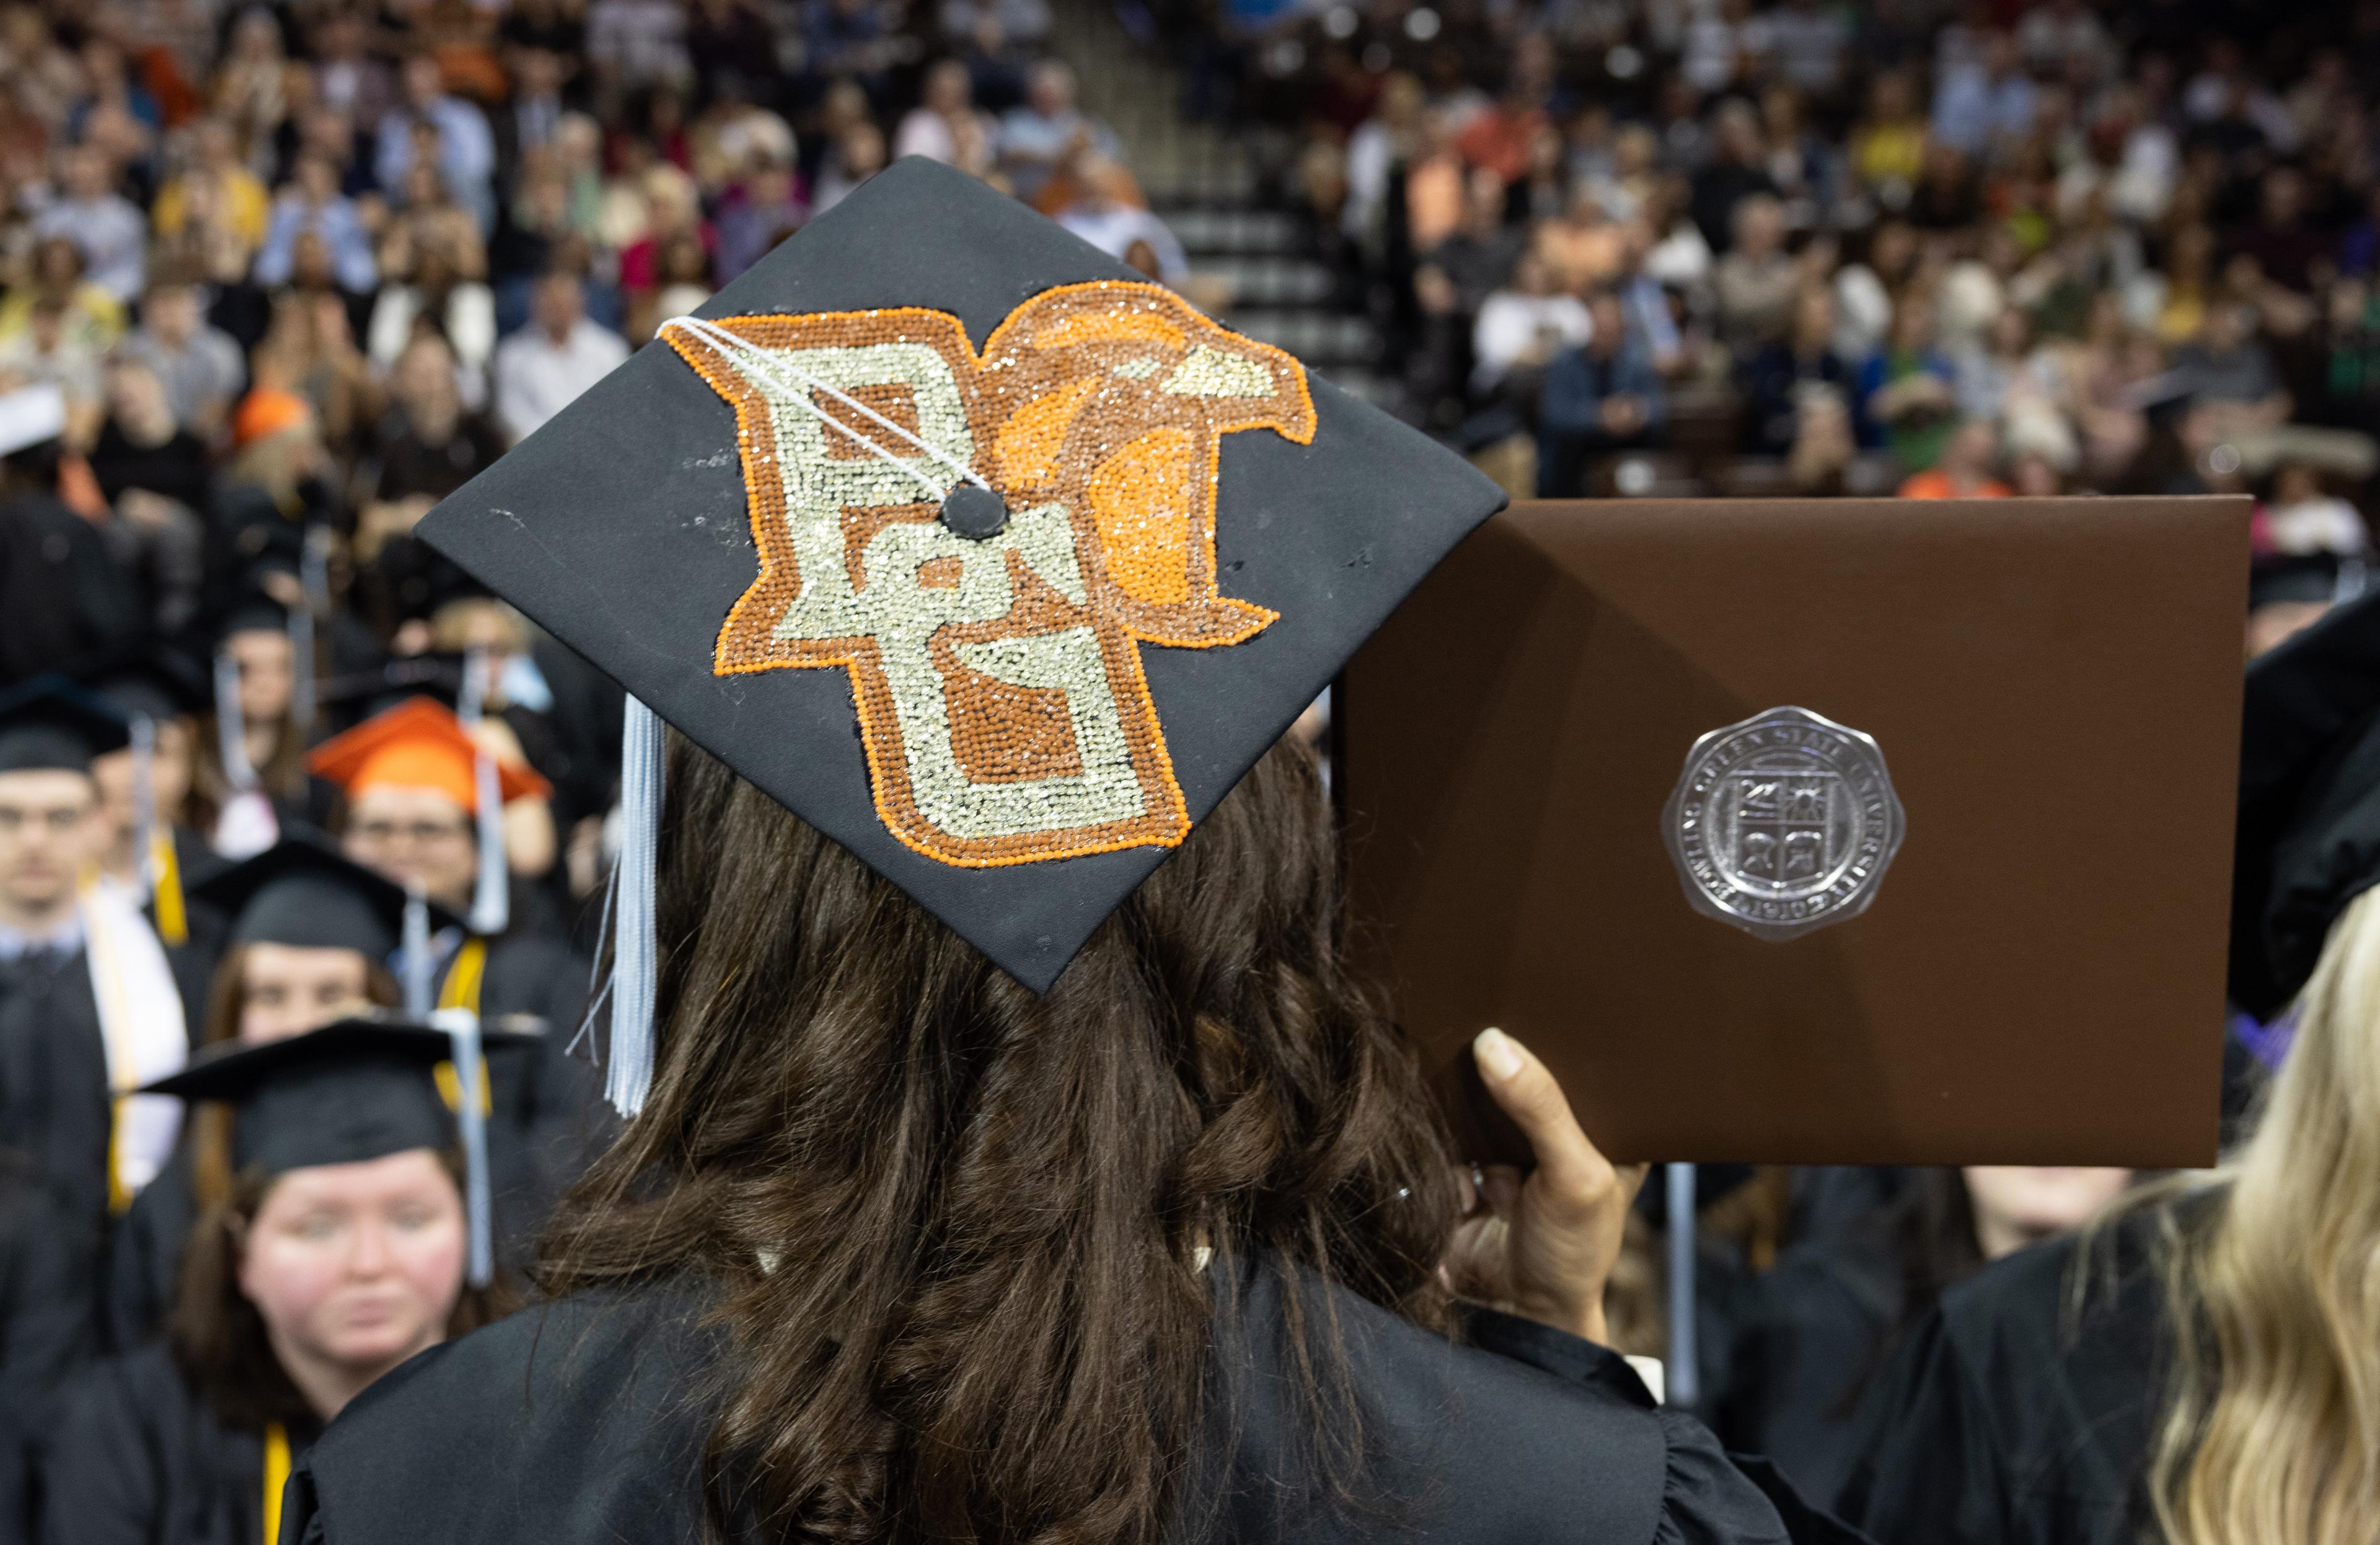 A Bedazzled BGSU logo appears on the top of a graduation cap